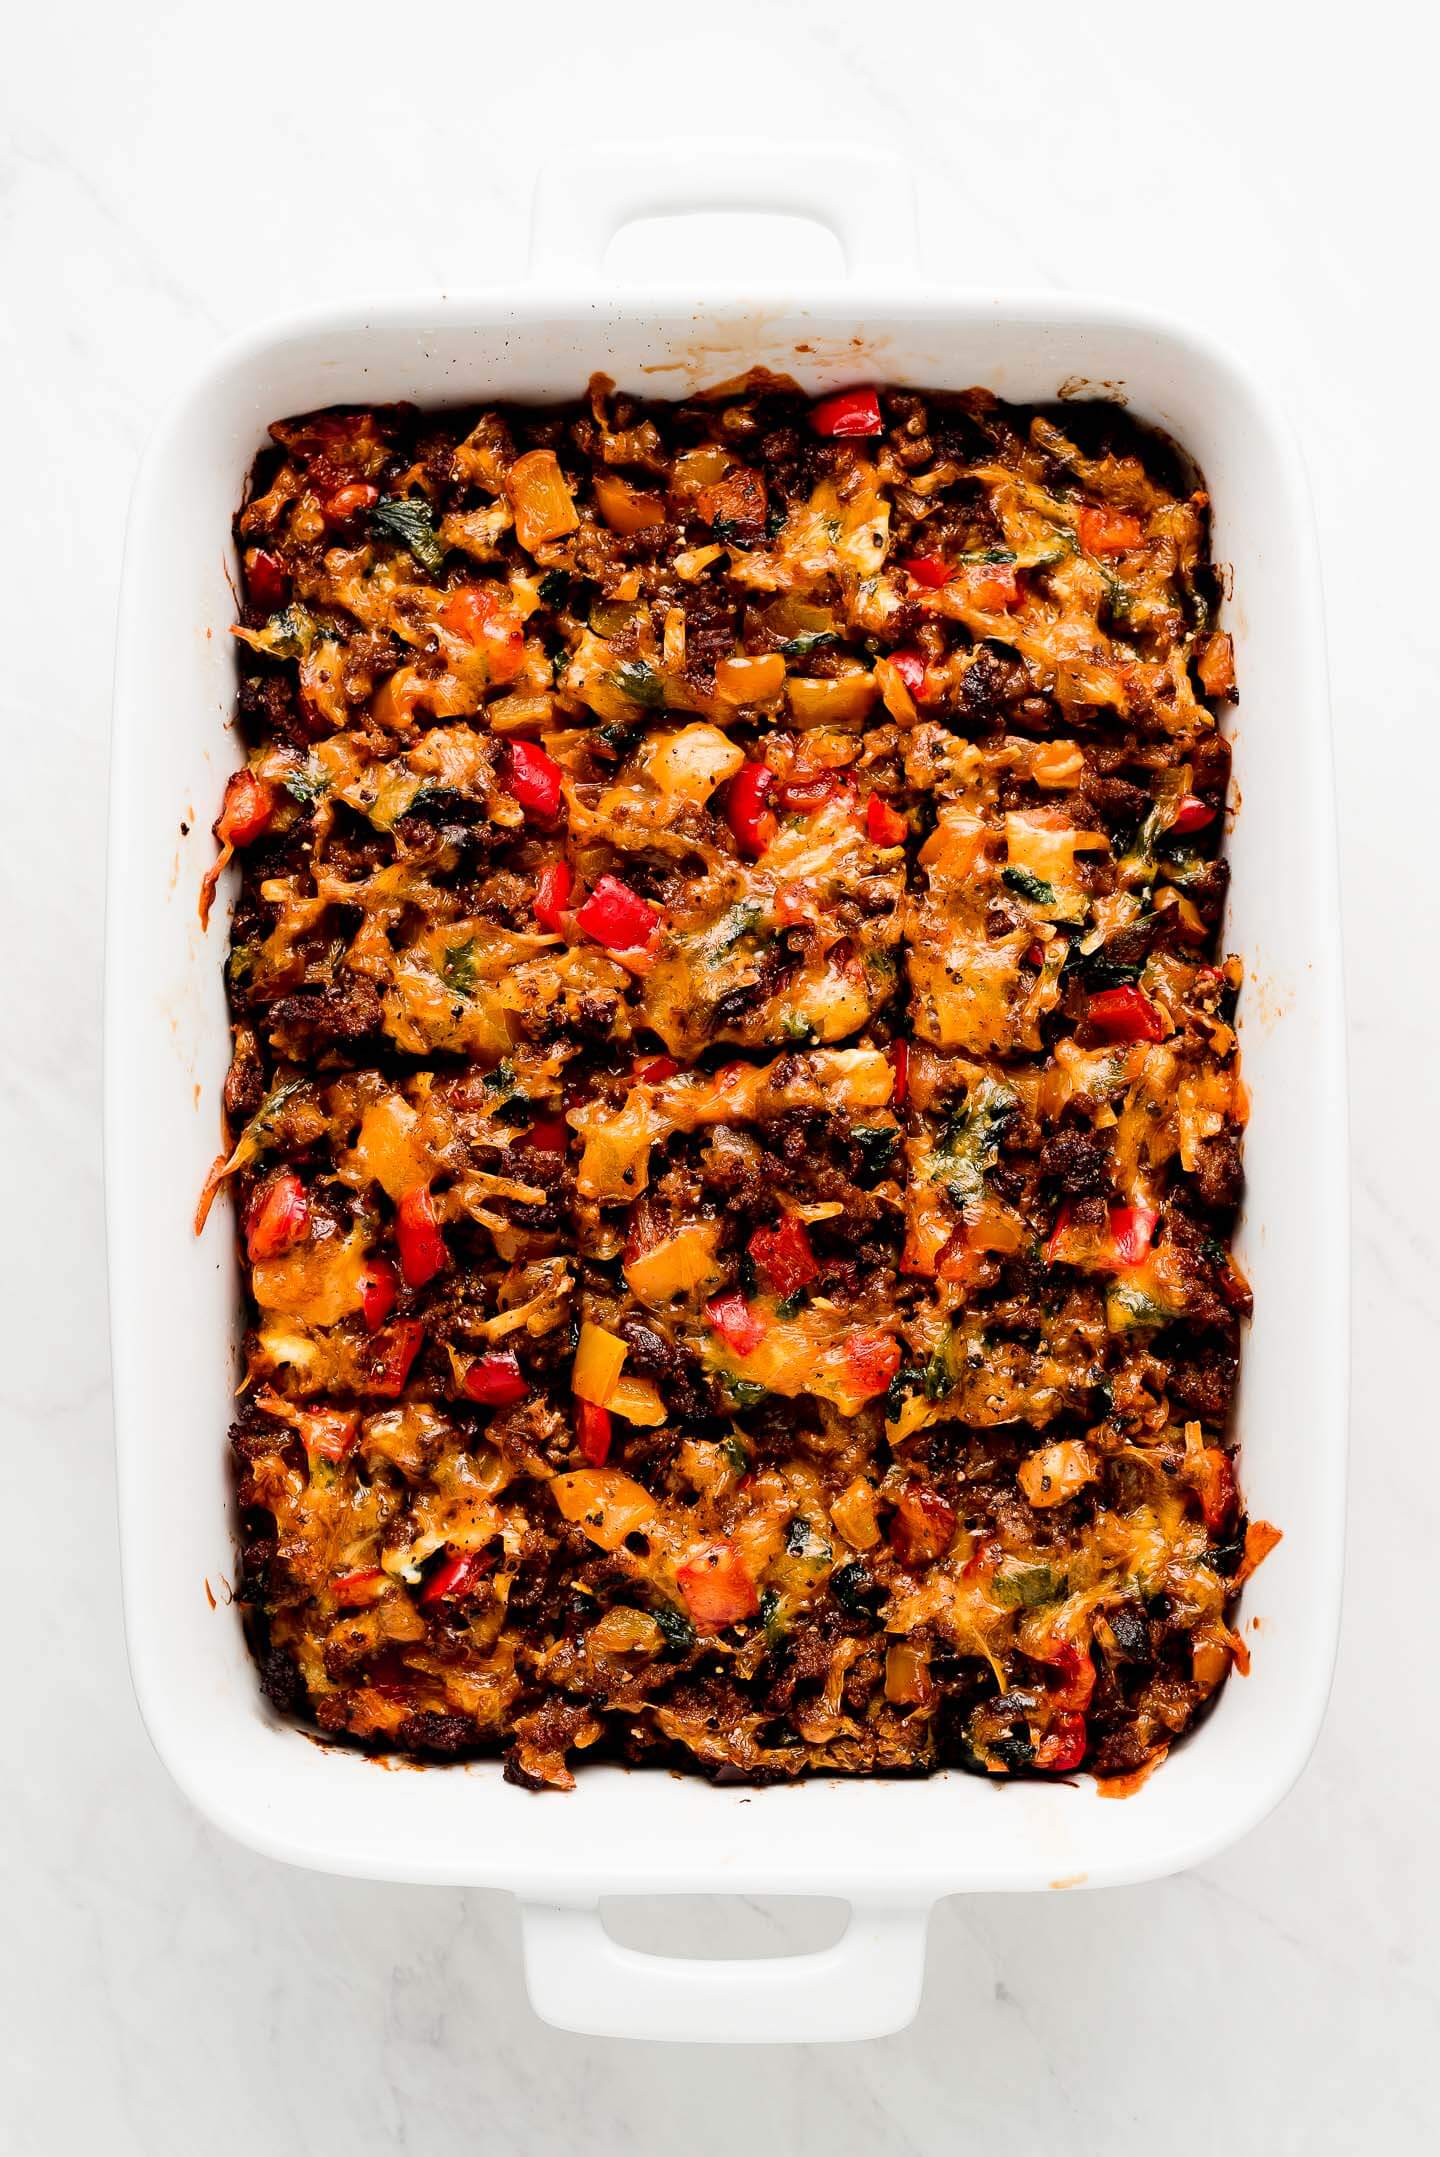 Full dish of Sausage Breakfast Casserole cut in squares.